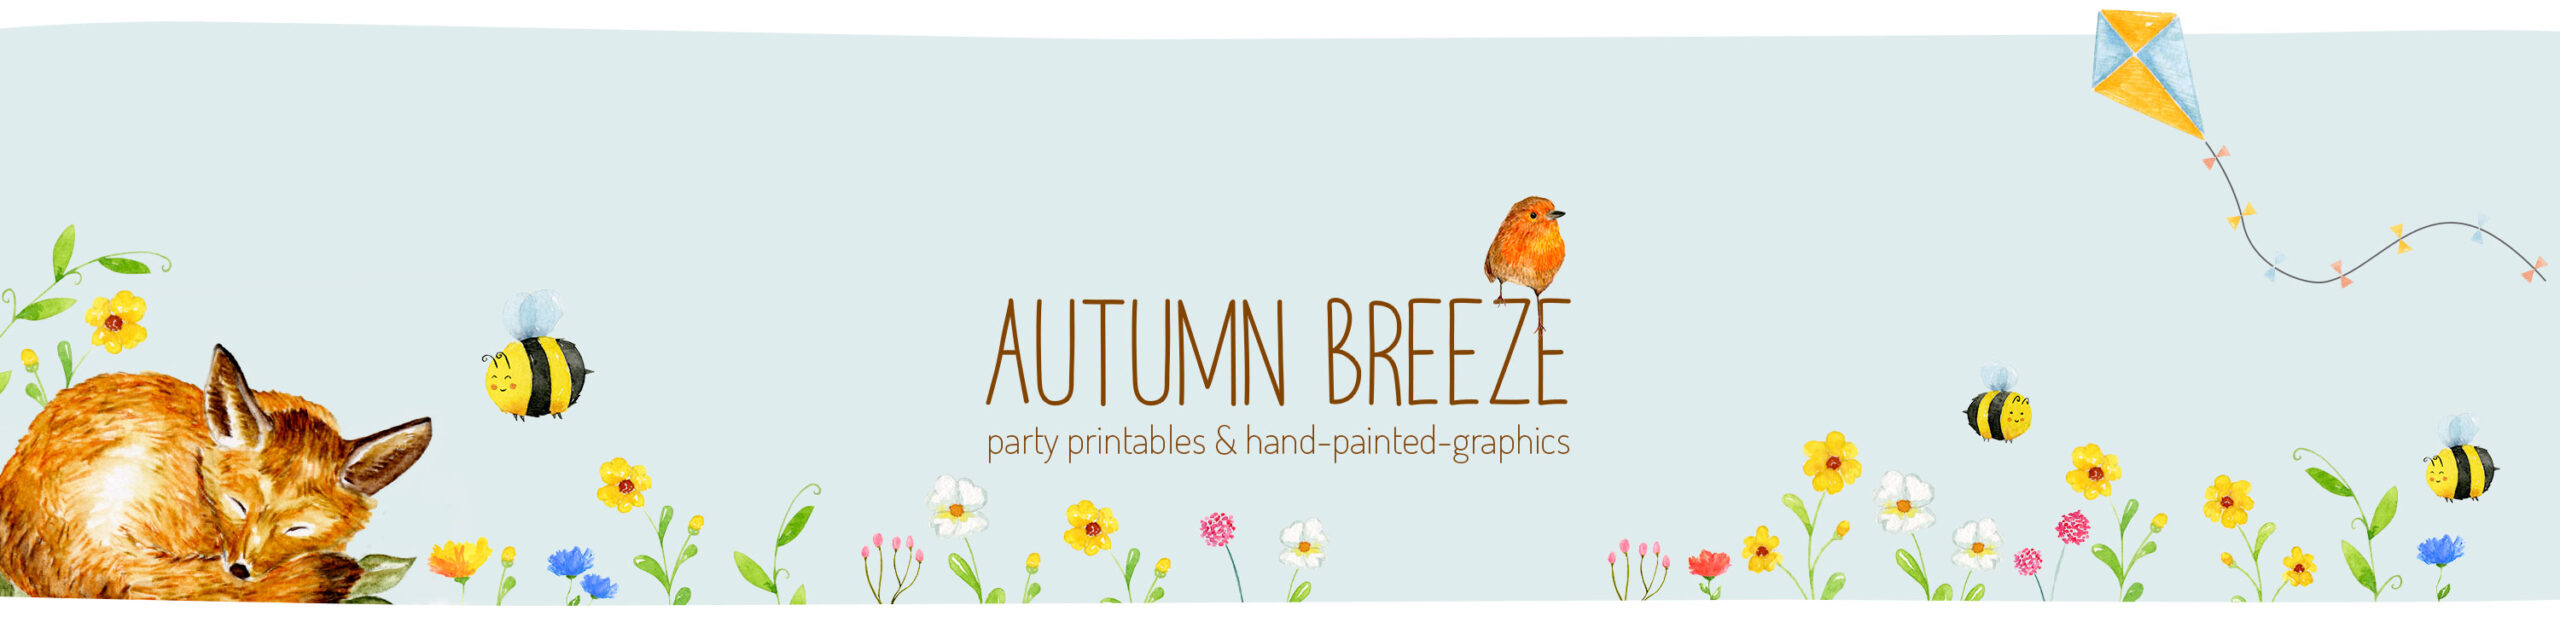 banner with cute illustration from autumn breeze design